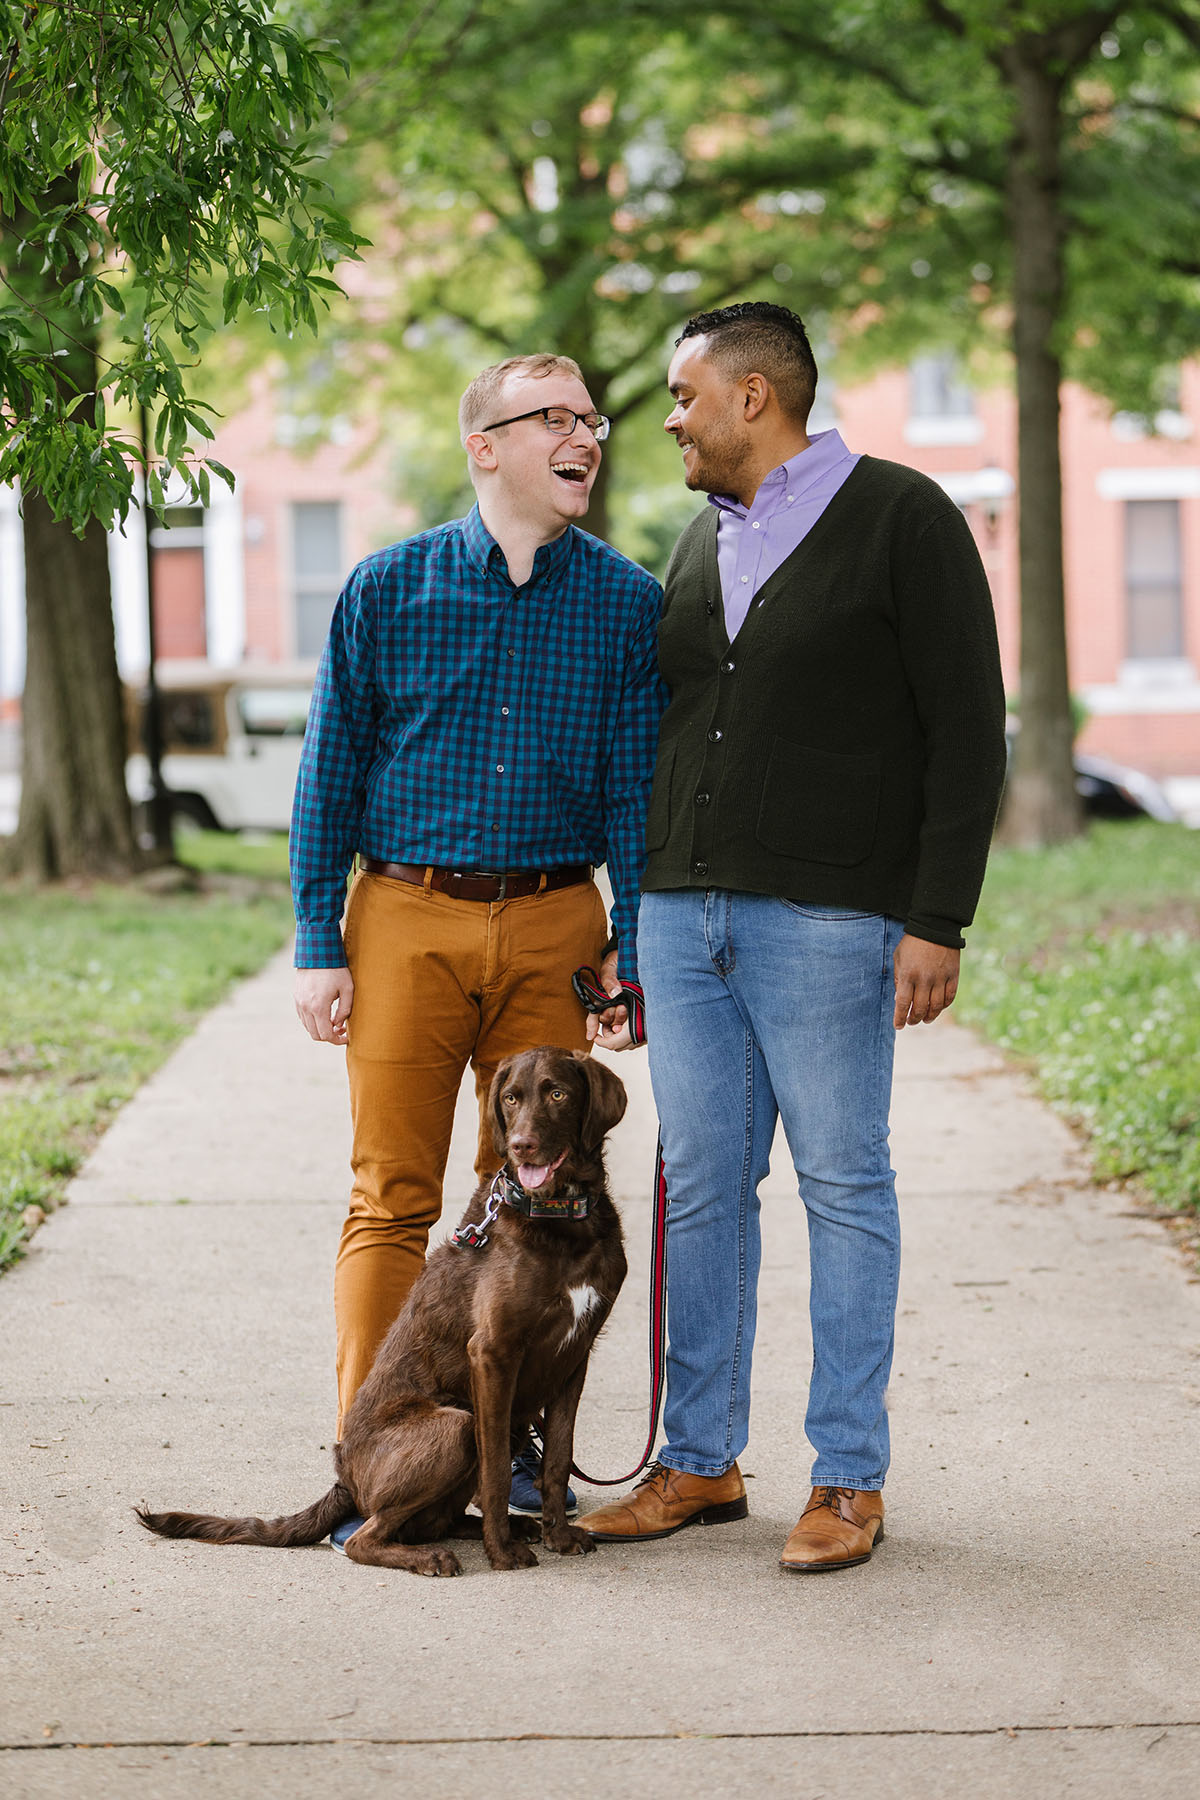 Boat rides and dog walks during loving Baltimore engagement photos two grooms dog